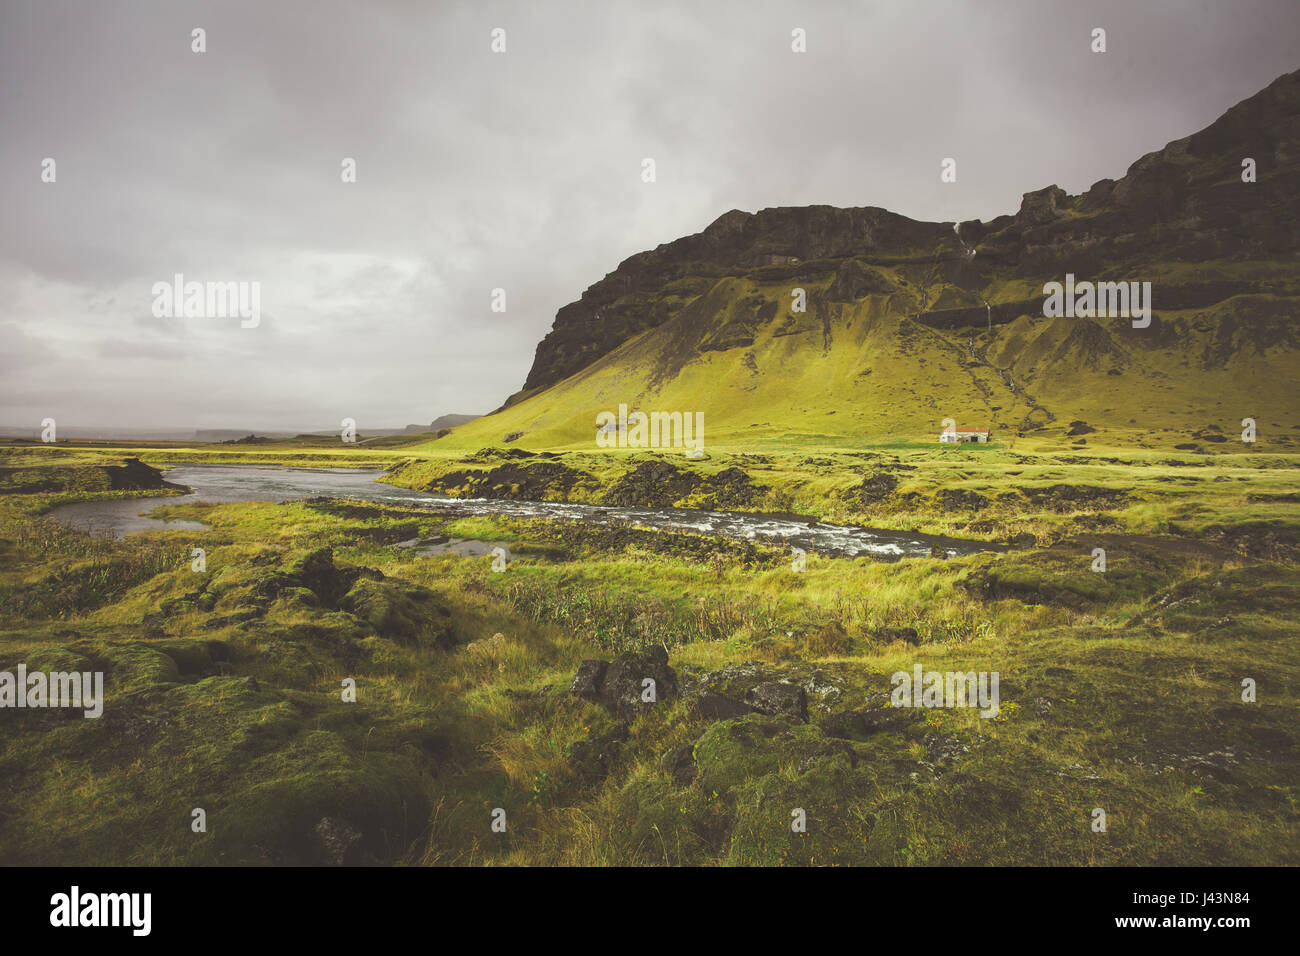 Cold water in Iceland. Stream in rocky mountains and lake side. Fresh and green grass. Beautiful mountain range in the background. Stock Photo